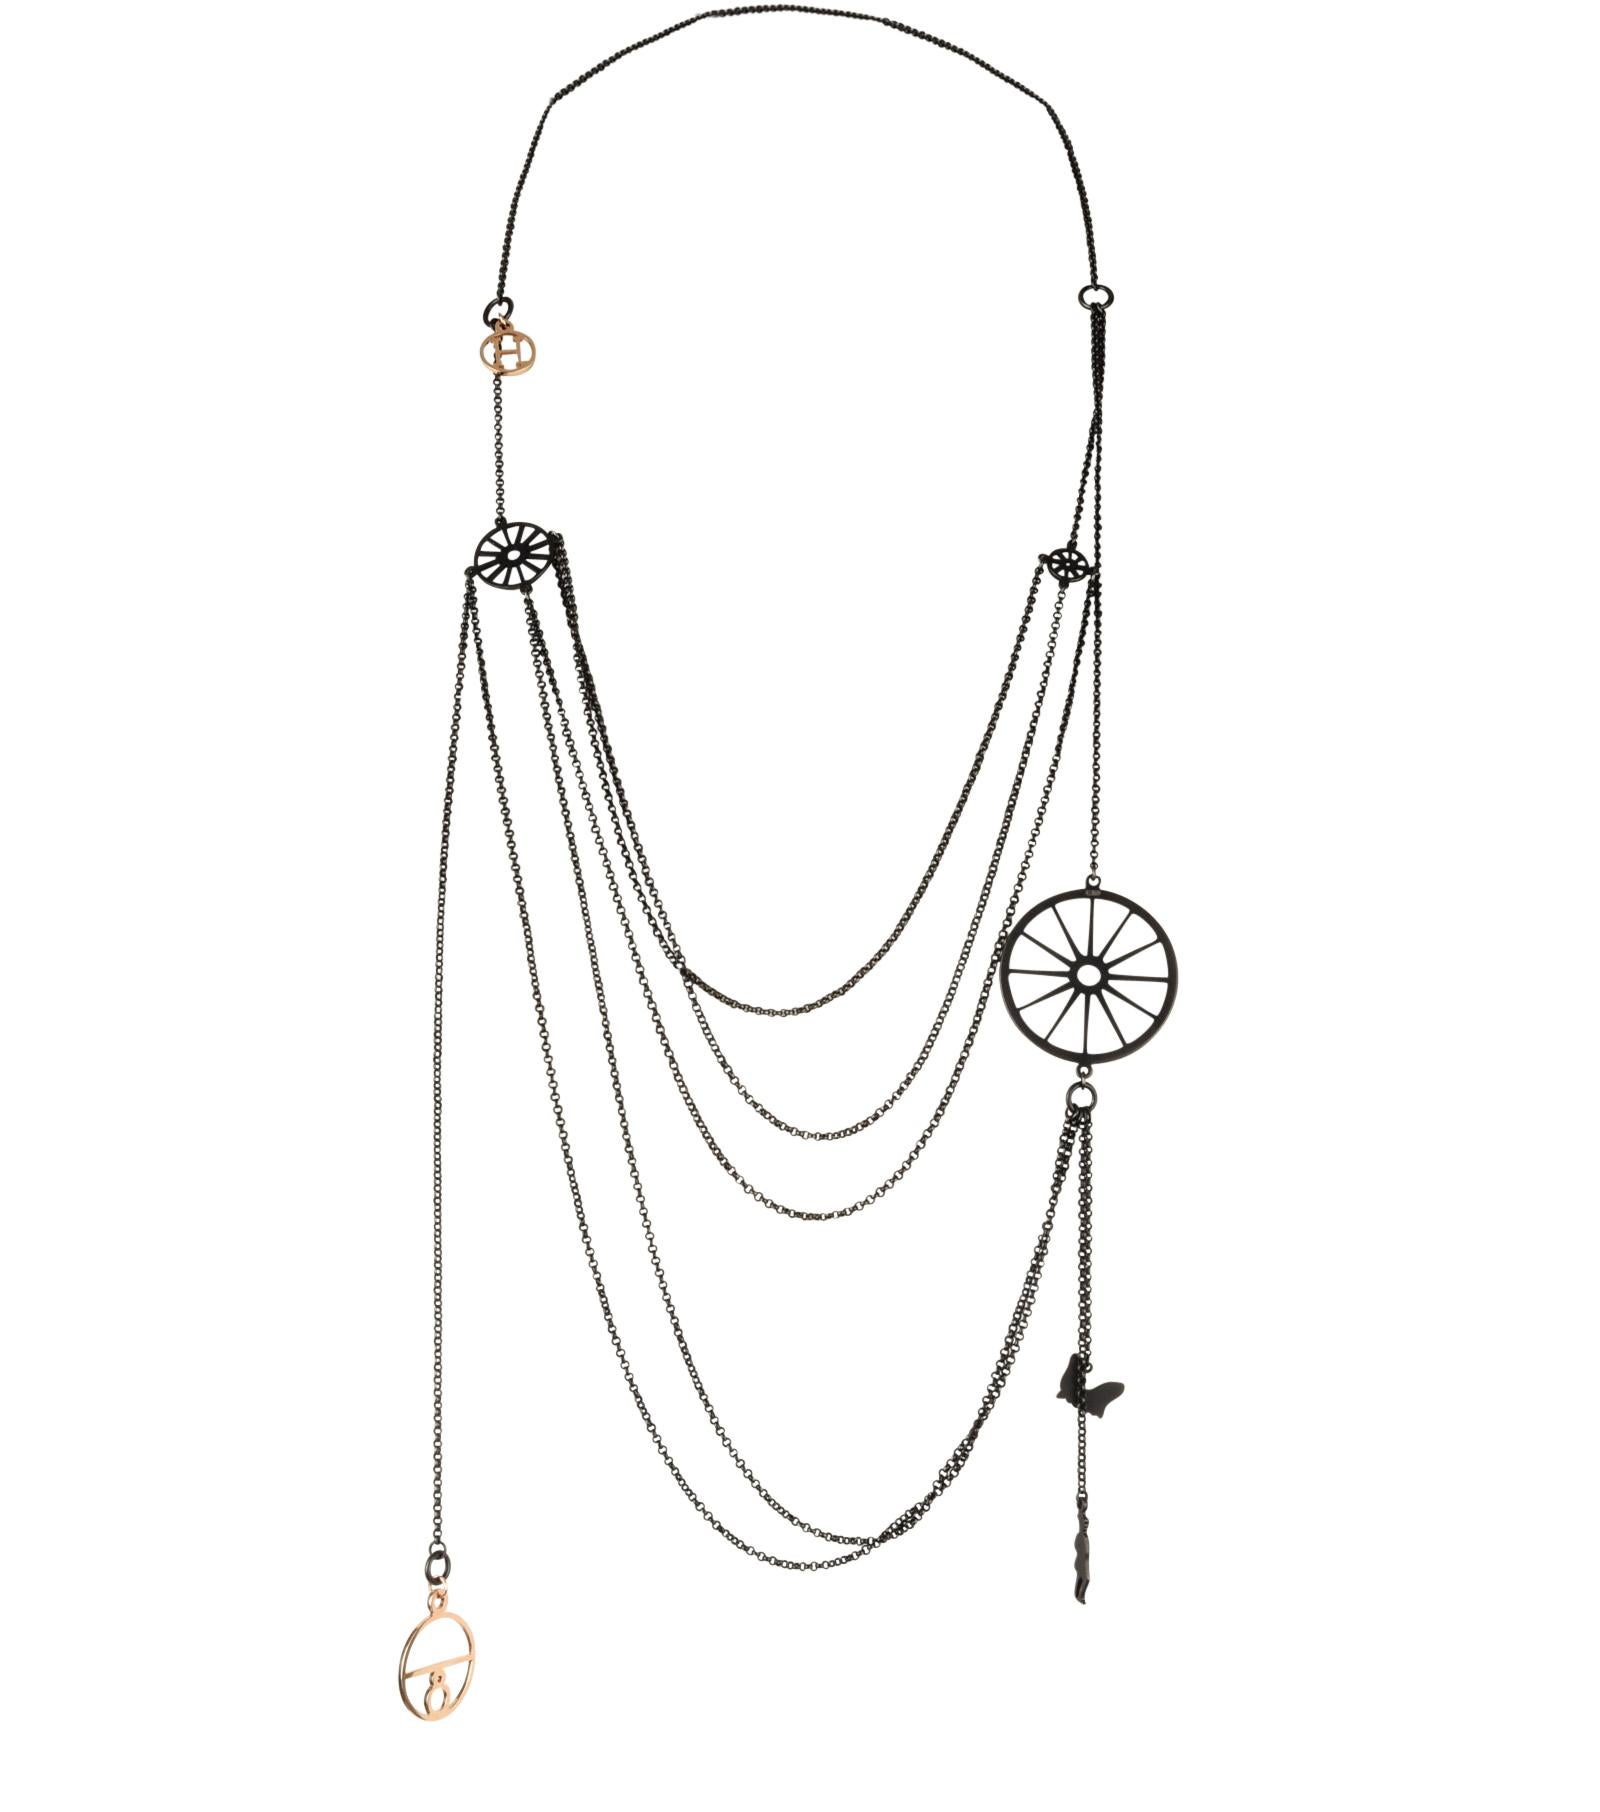 Hermes Crazy Caleche Necklace Blackened Silver 18K Rose Gold Limited Edition For Sale